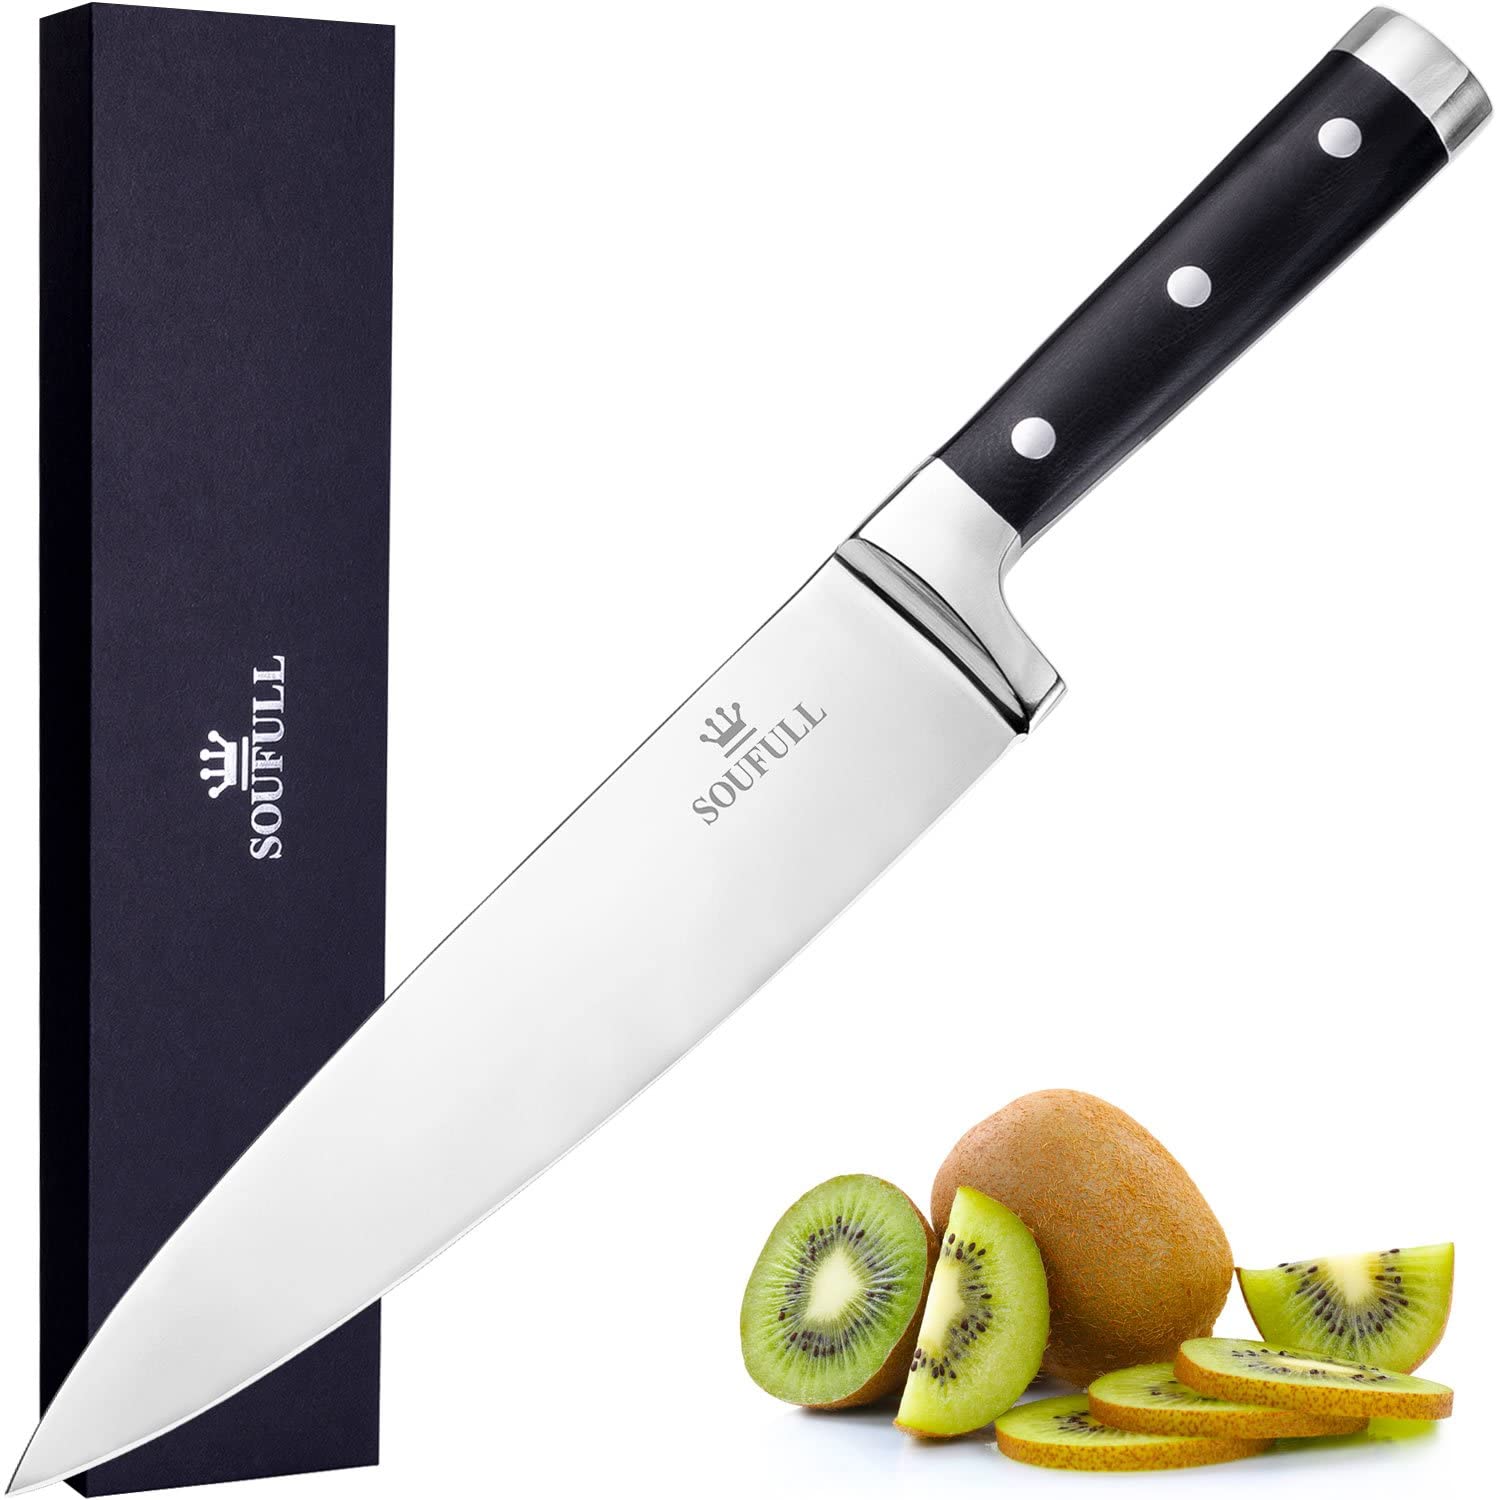 Soufull Chef Knife 8 inches Japanese Stainless Steel Gyutou Knife  Professional Kitchen Knife with Ergonomic Handle (chef knife) 